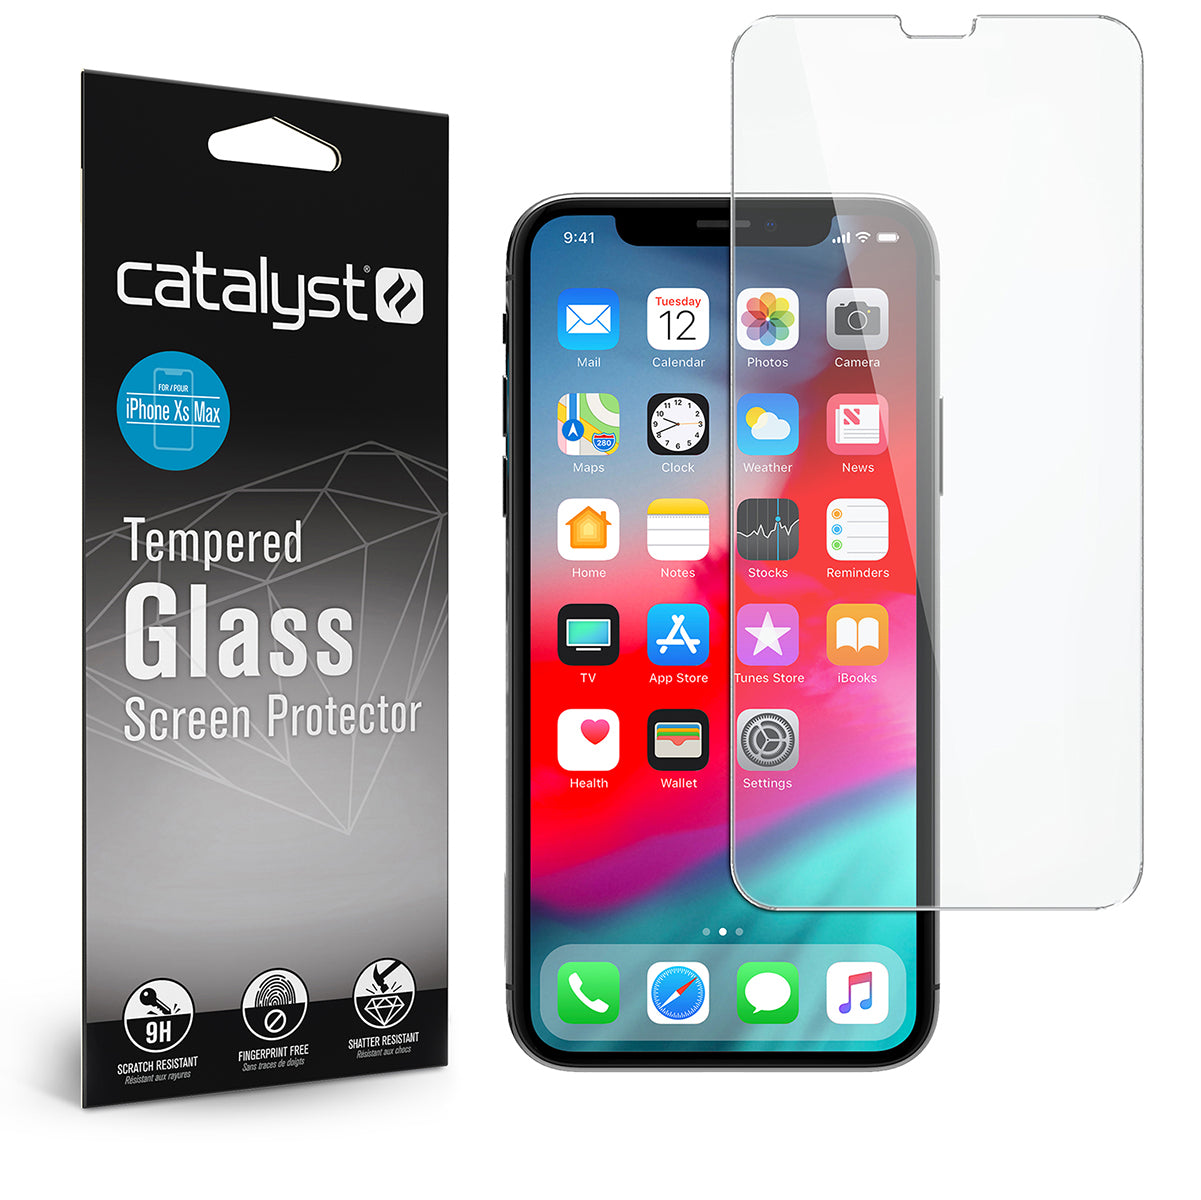 Catalyst Add a Tempered Glass Screen Protector with packaging and tempered glass screen protector and iPhone.